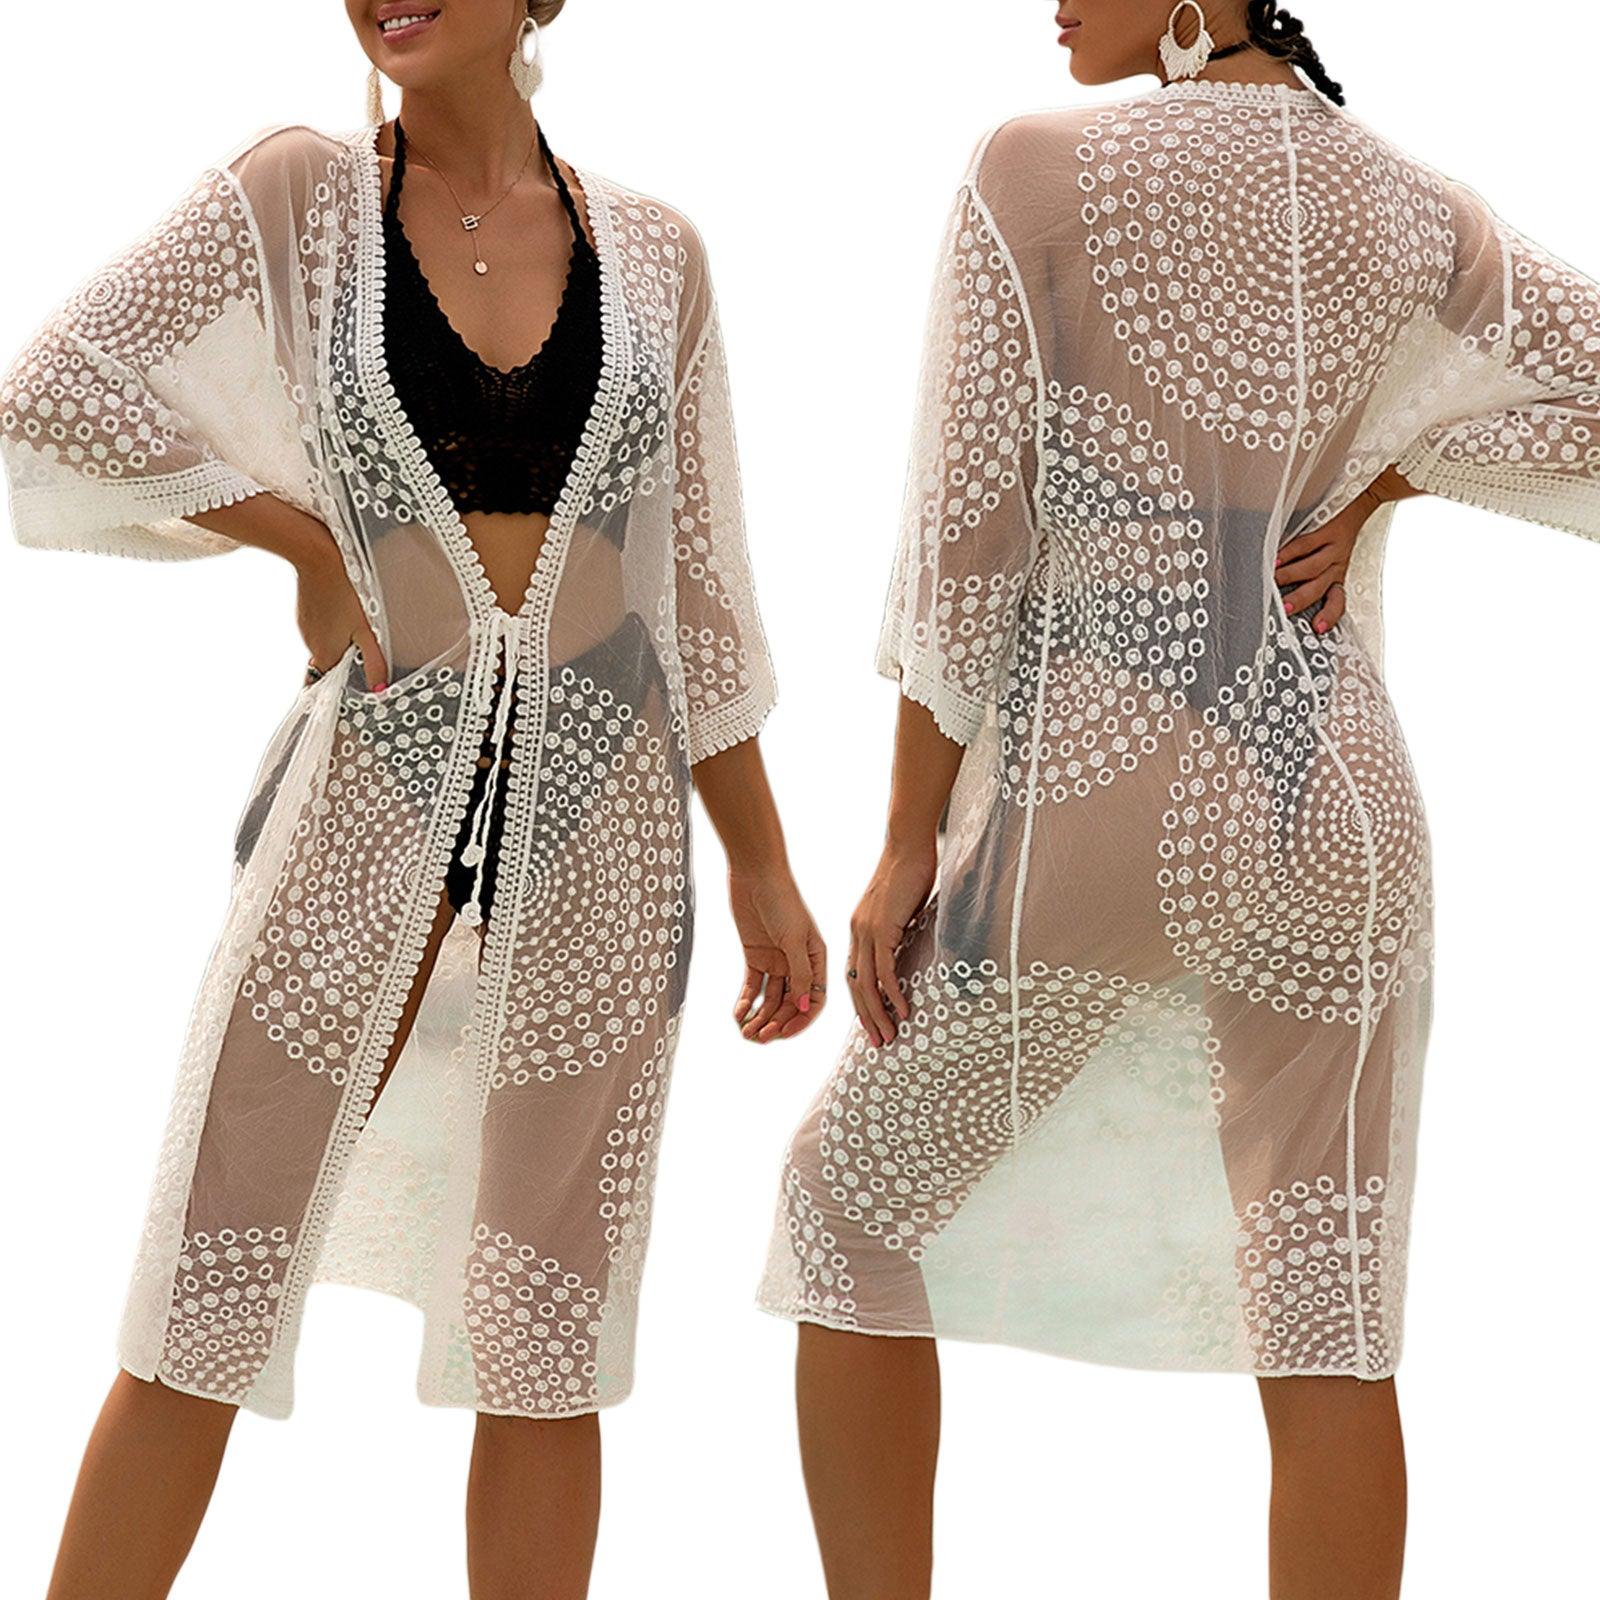 White Lace Cover Up Cover Ups - The Burner Shop